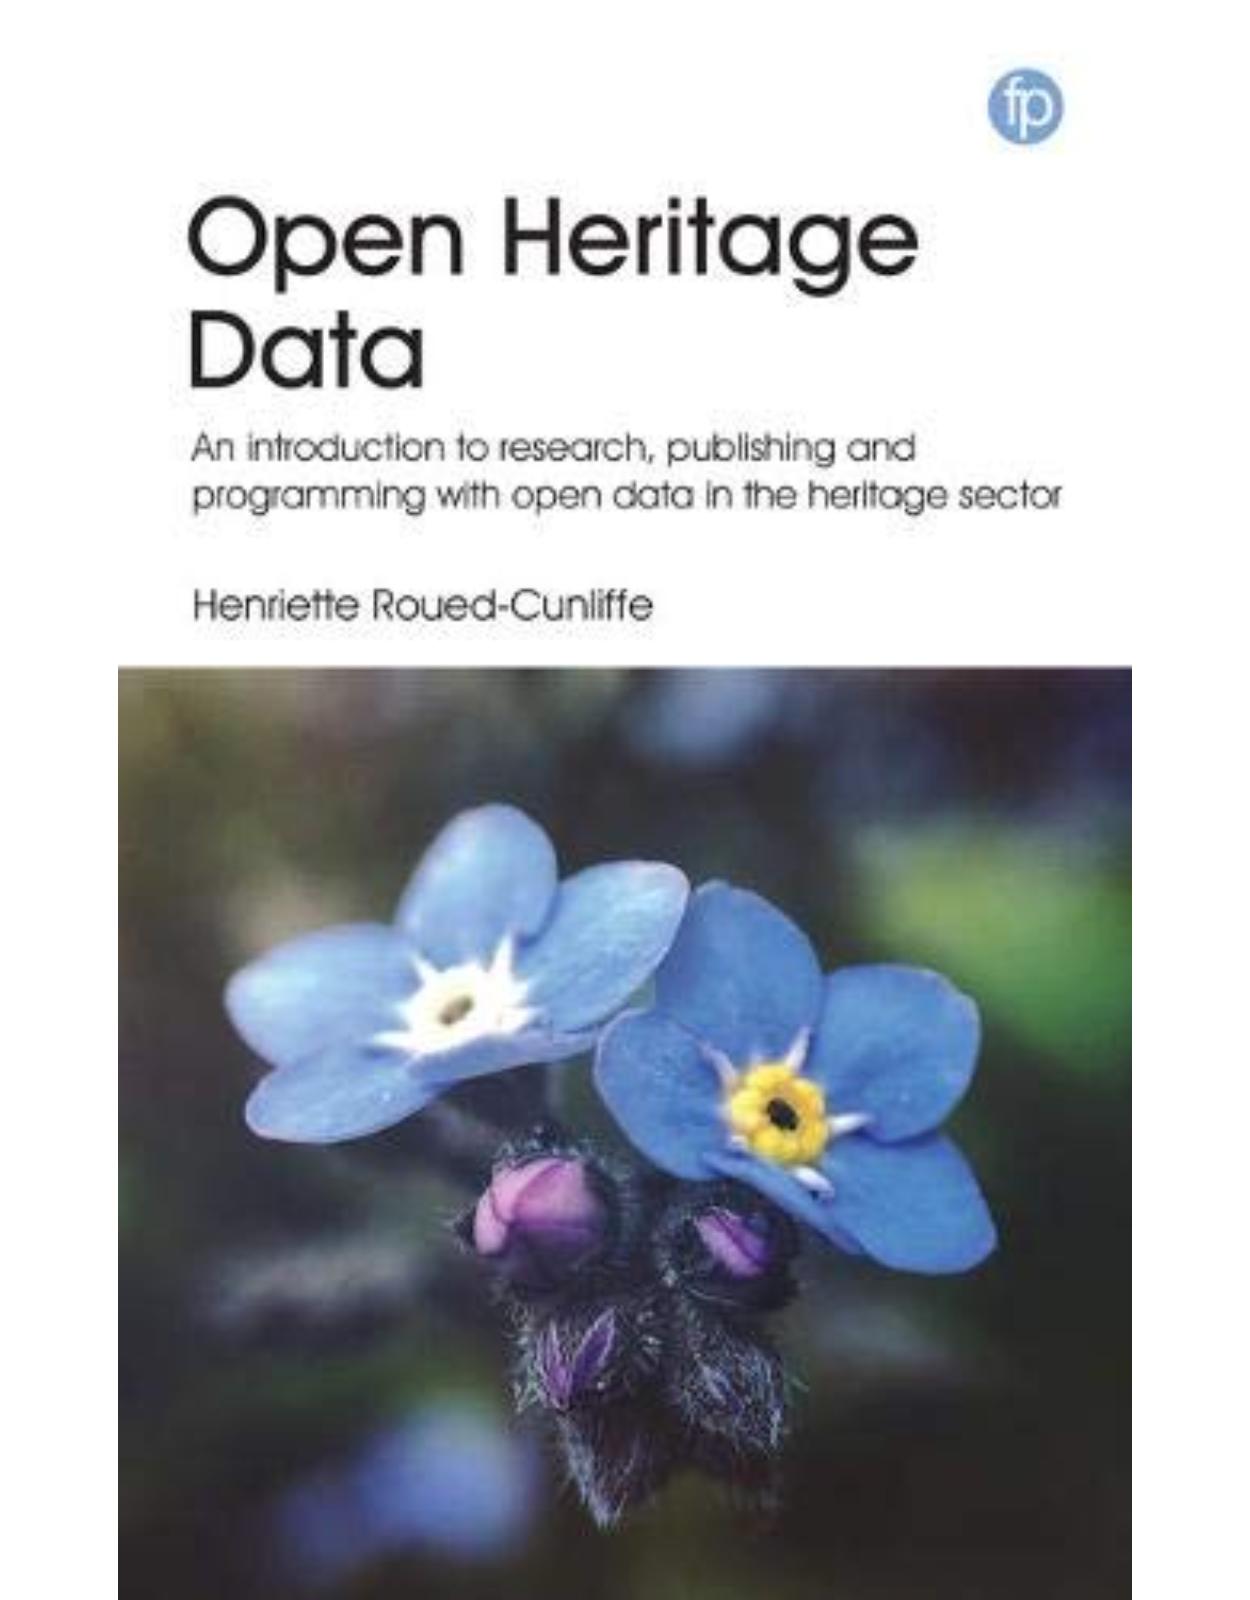 Open Heritage Data: Publishing and using open data for visualization, mapping, and mining in cultural heritage institutions